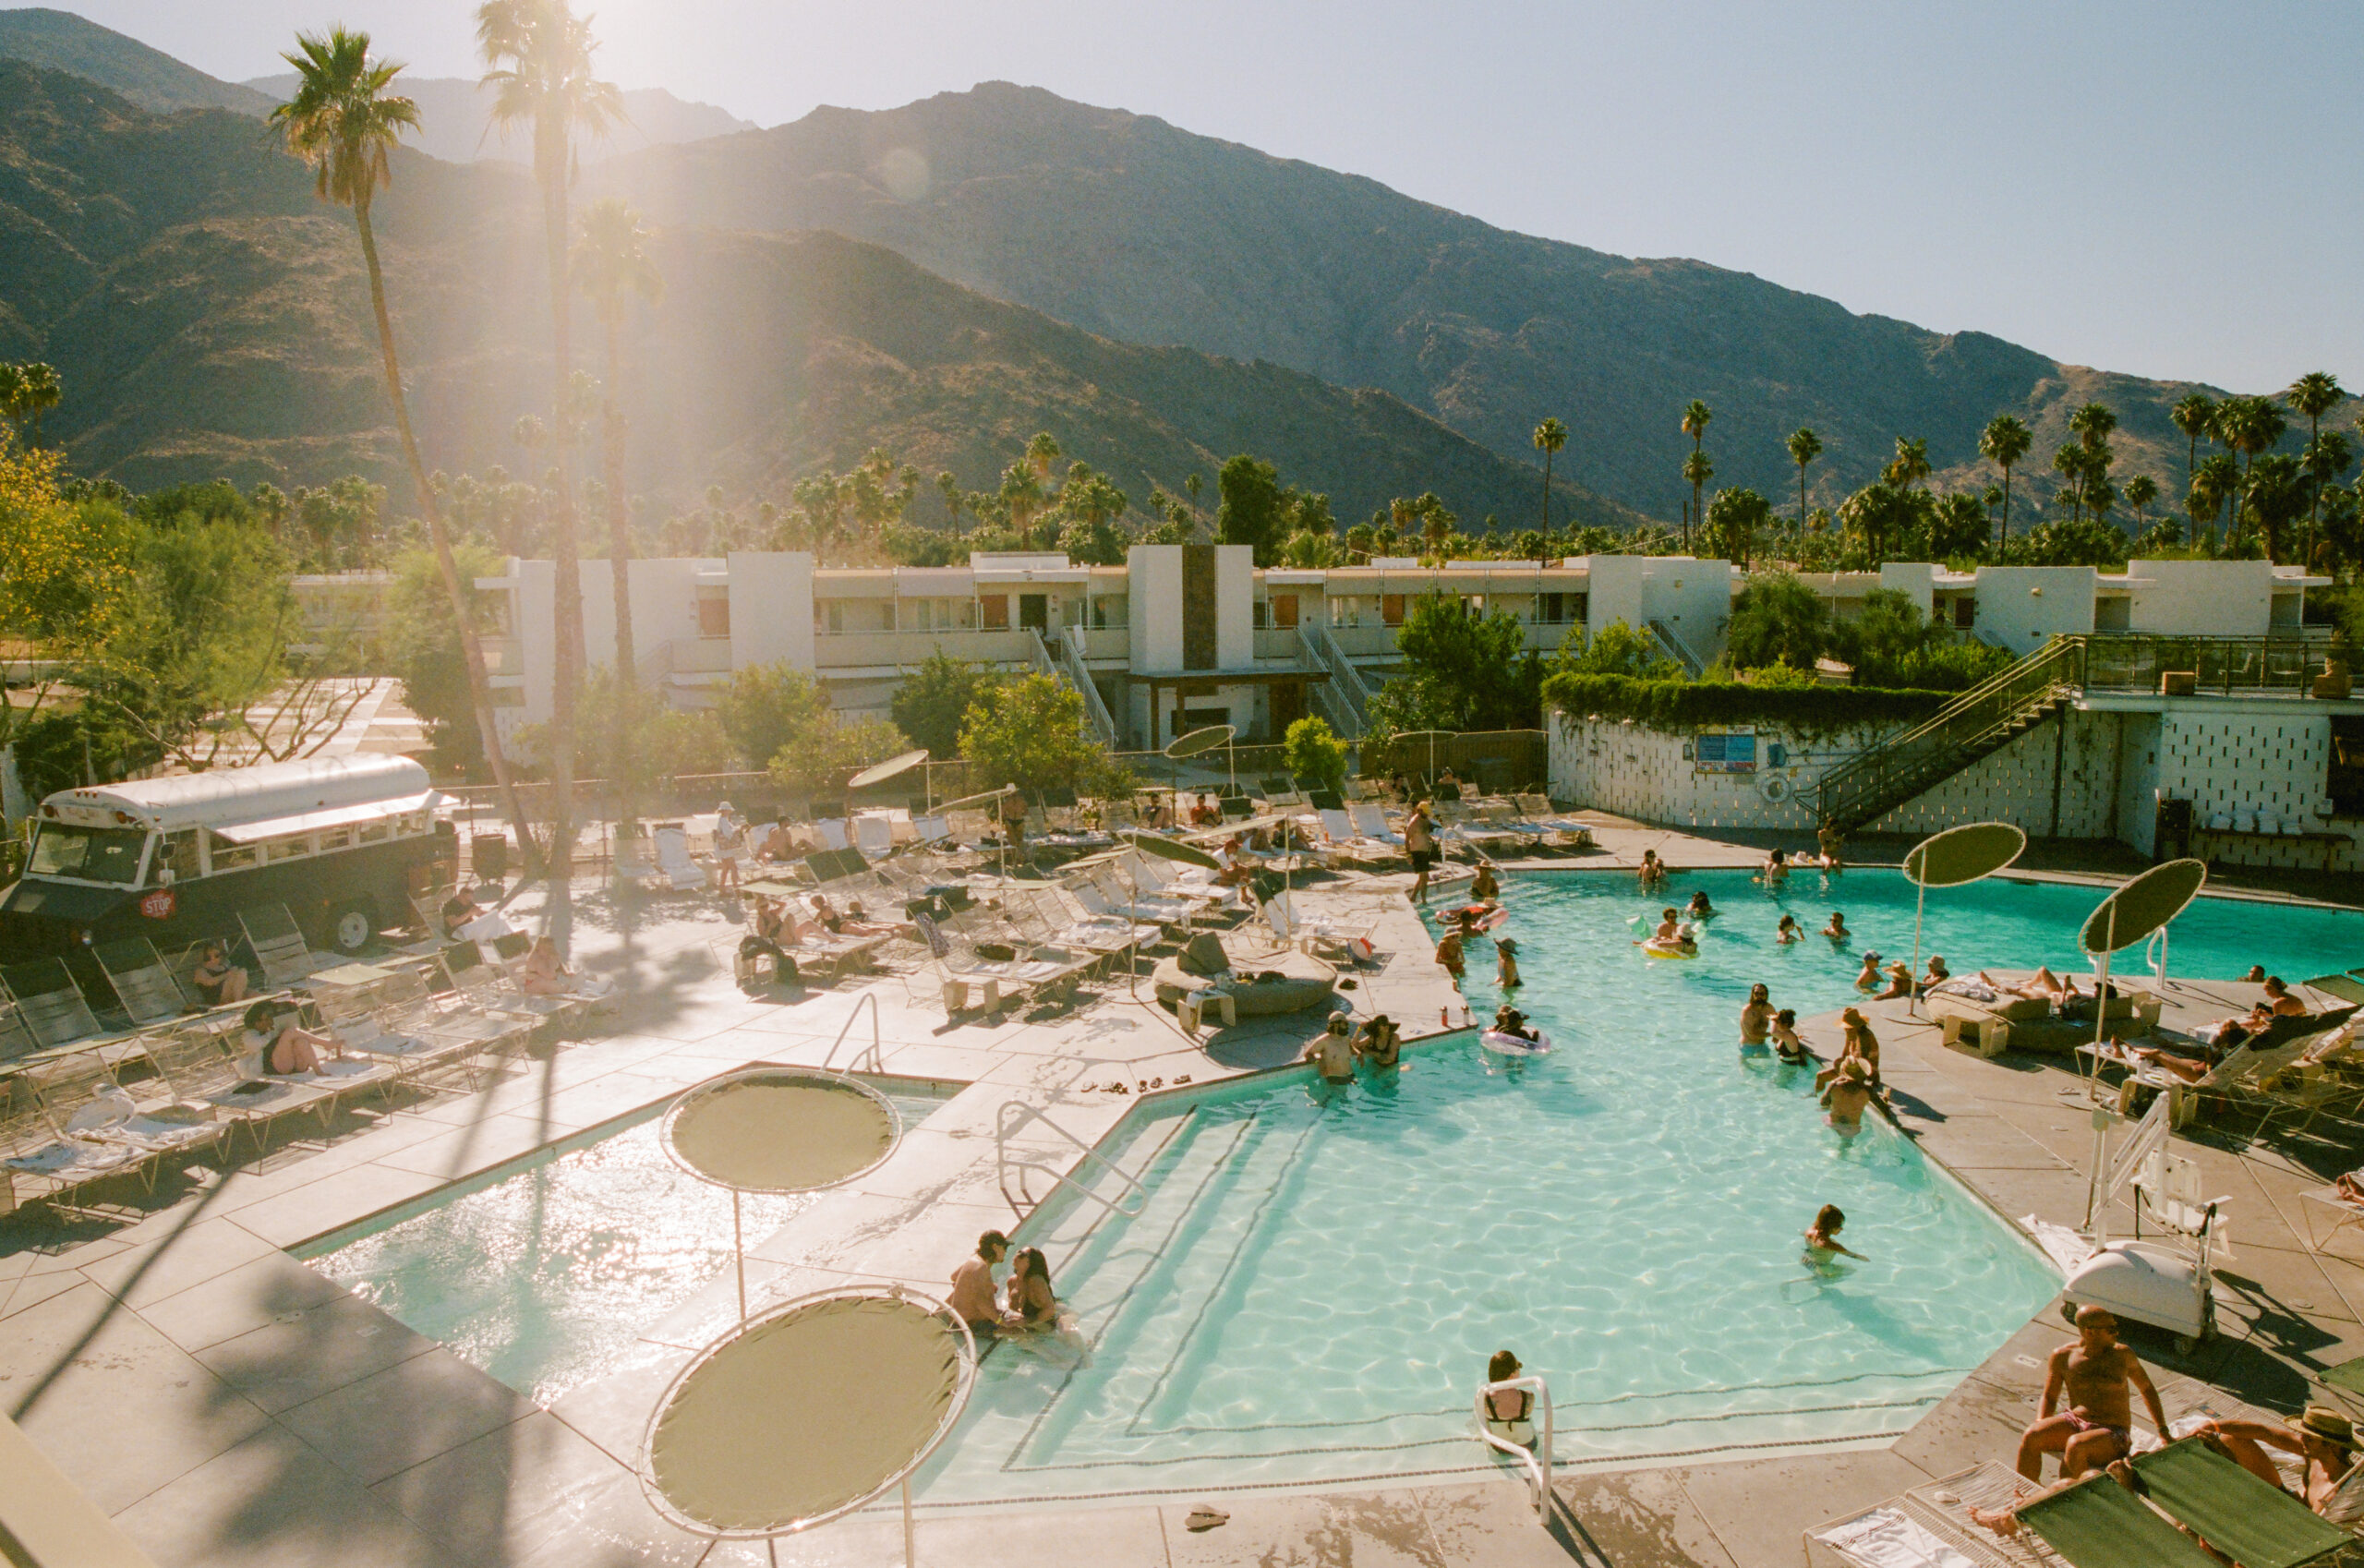 View of the pool at the Ace Hotel in Palm Springs, CA